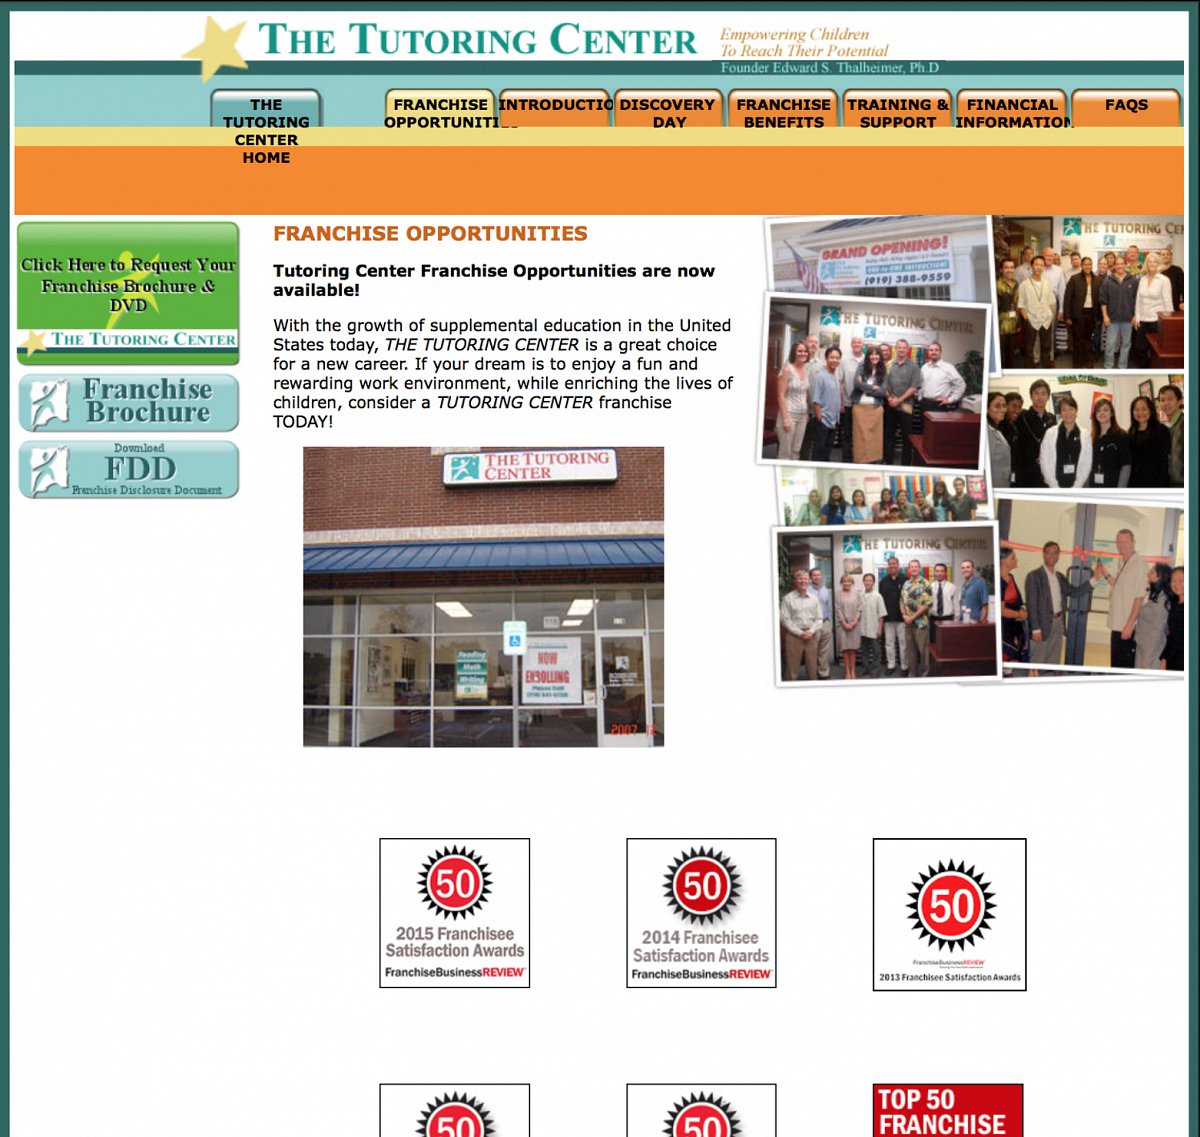 Previous franchise landing page for The Tutoring Center